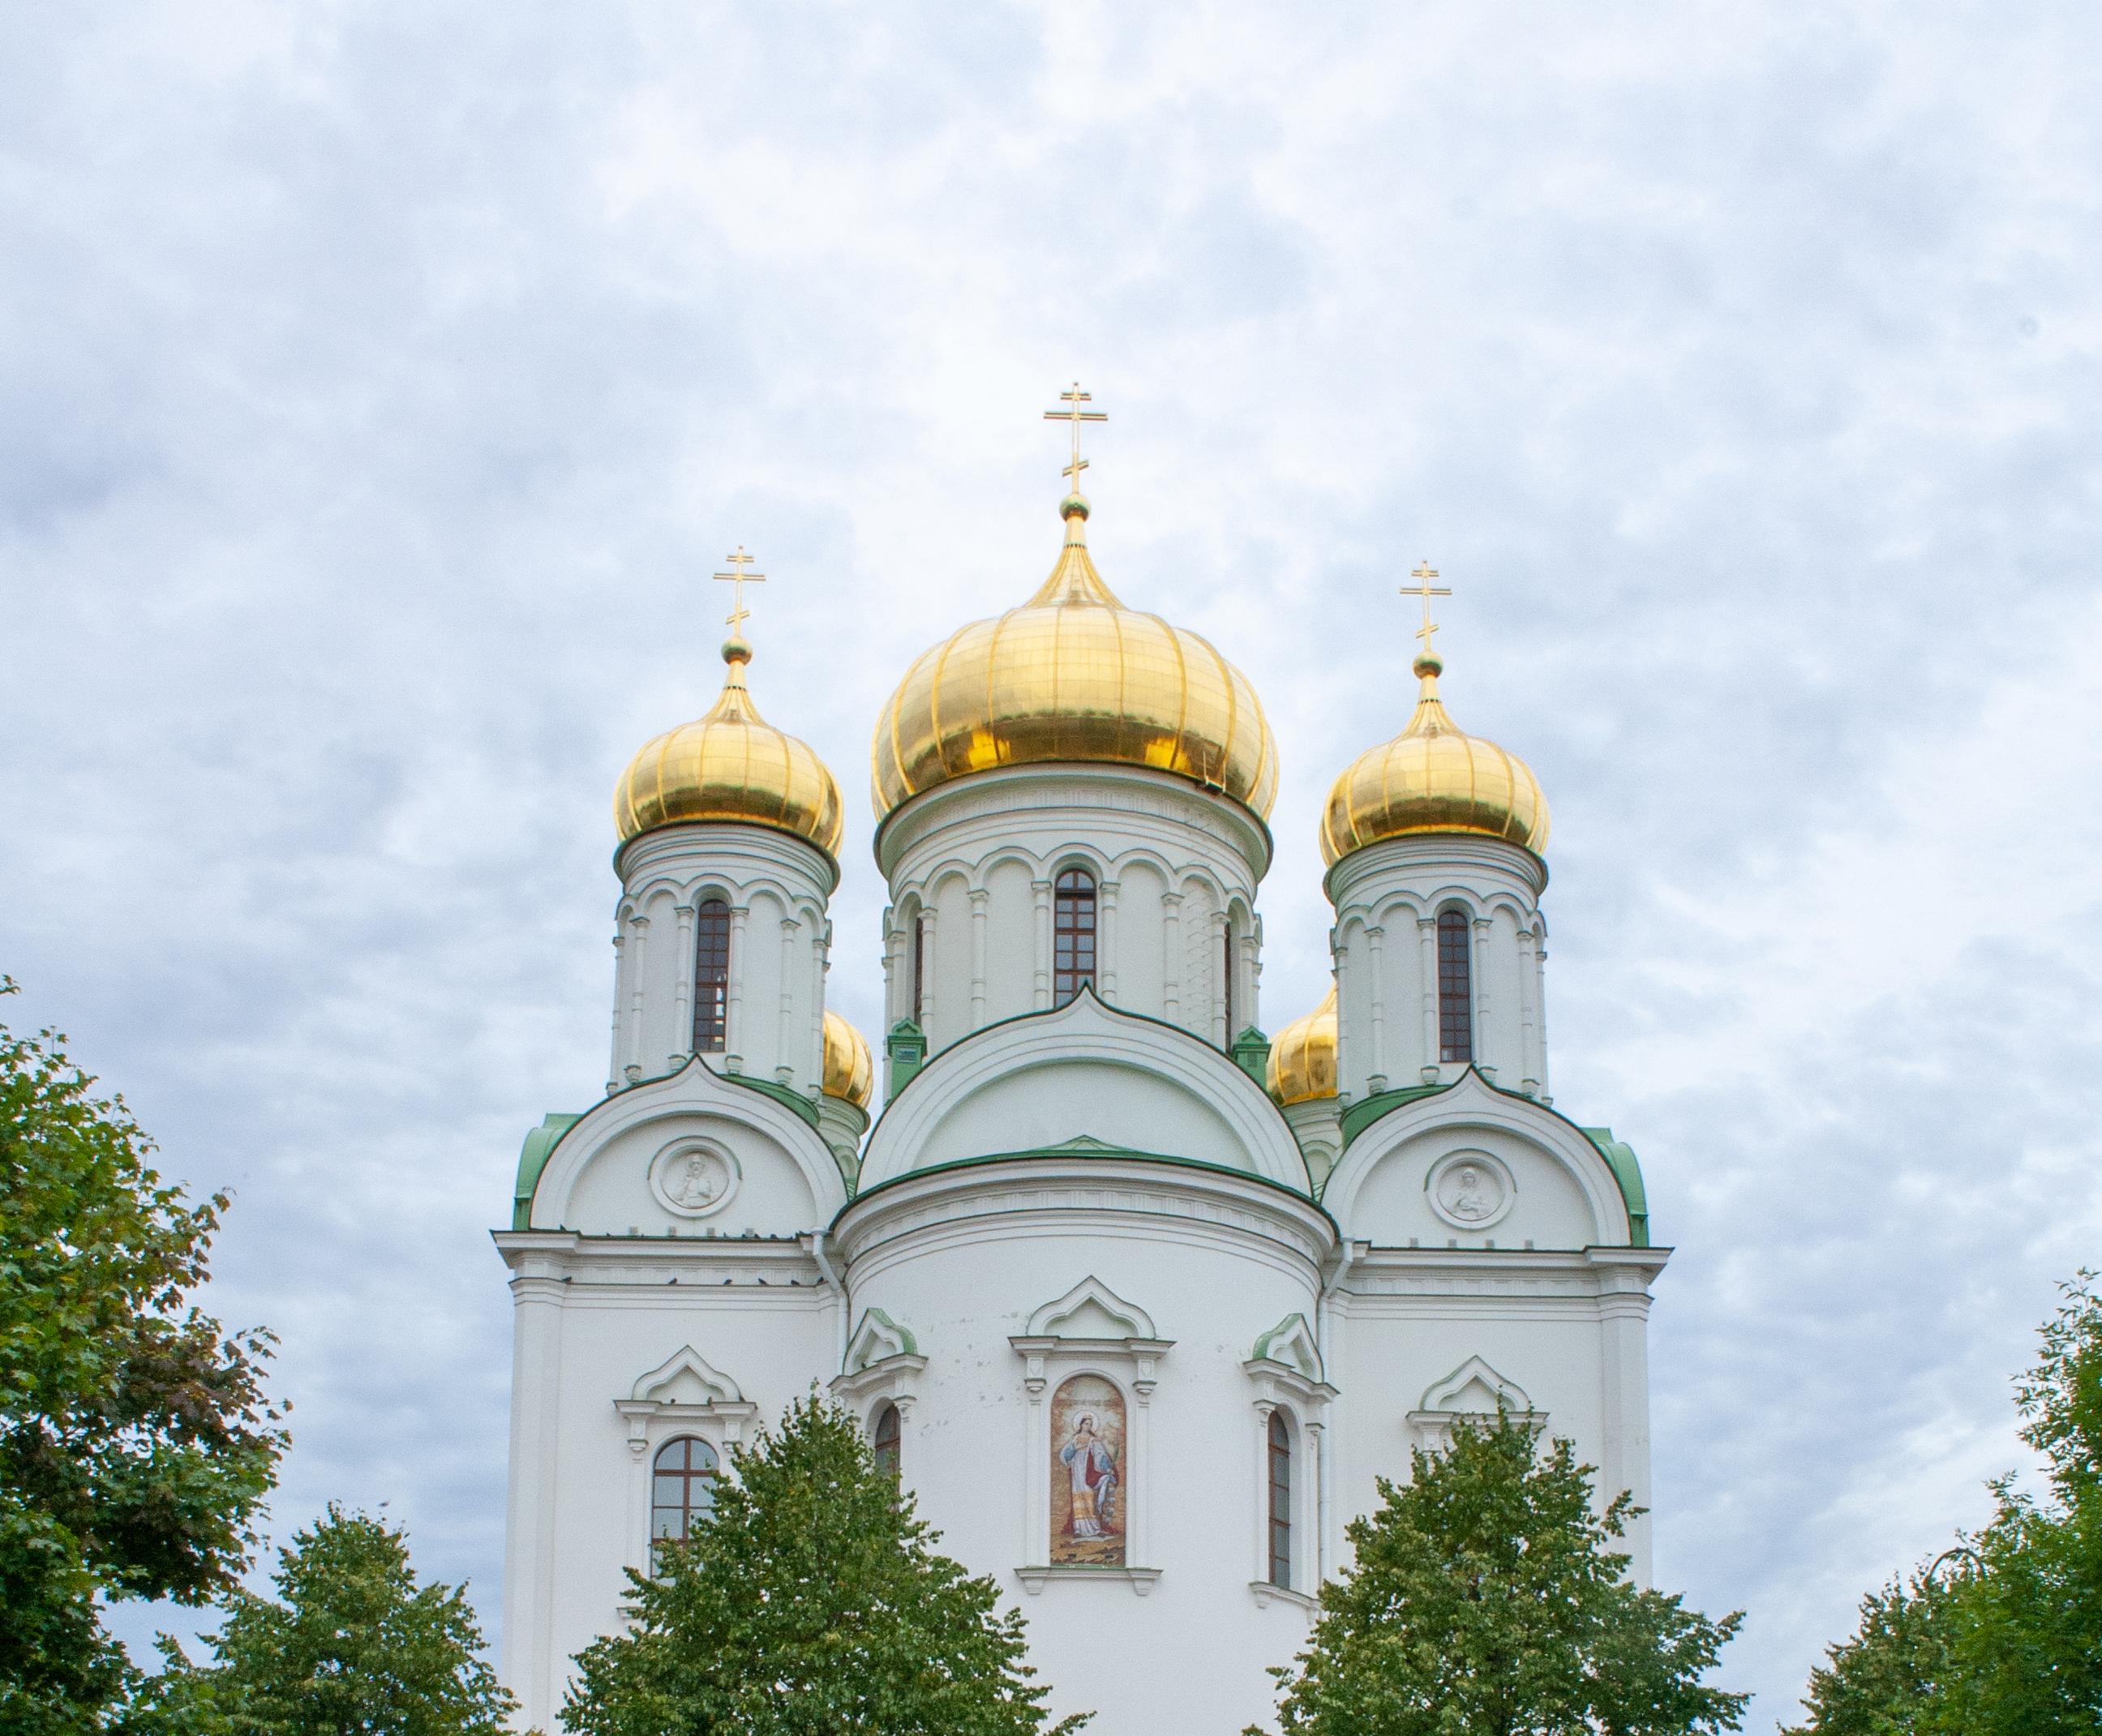 St. Catherine's Cathedral in Pushkin